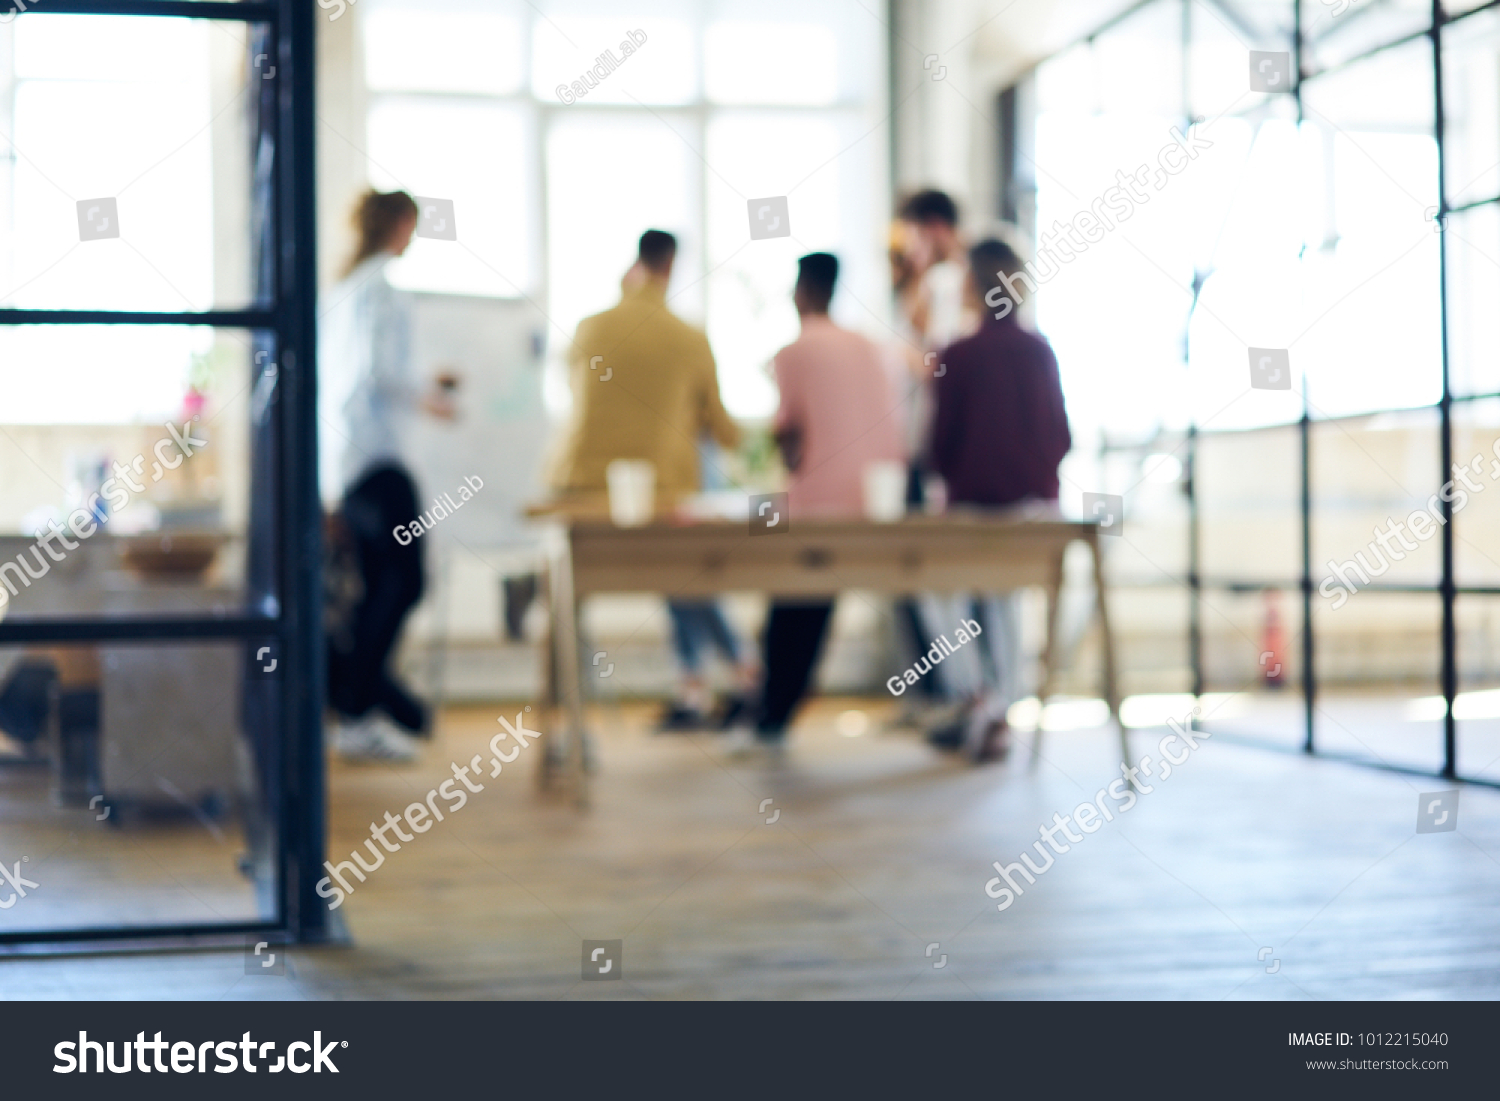 Blurred image, people silhouette collaborating in office interior. Defocused space for your information, teamwork process. Group of coworkers discussing ideas. Colleagues having informal work meeting #1012215040